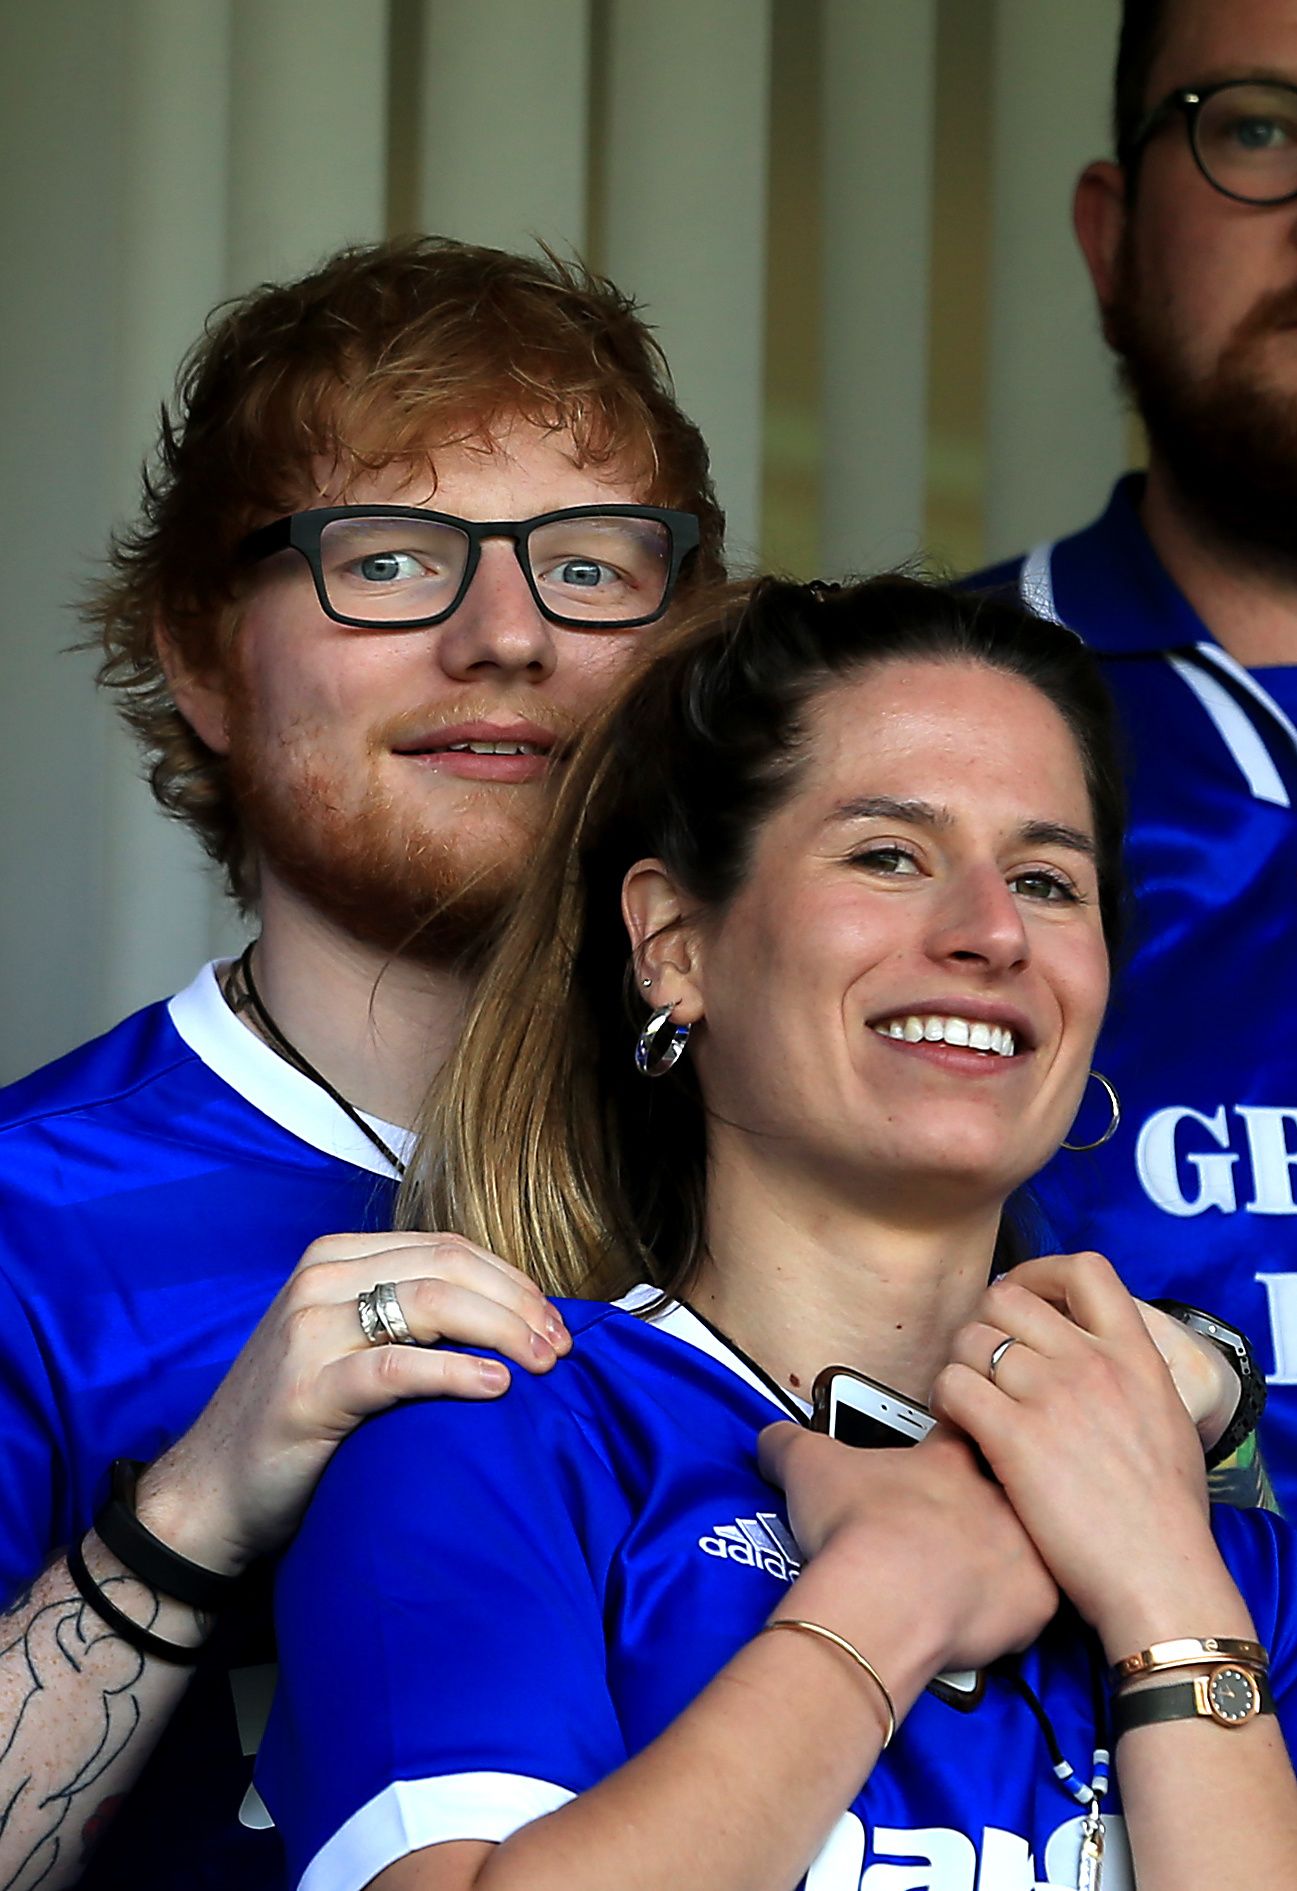 Musician Ed Sheeran and fiance Cherry Seaborn look at the Sky Bet Championship match between Ipswich Town and Aston Villa at Portman Road on April 21, 2018 | Photo: Getty Images